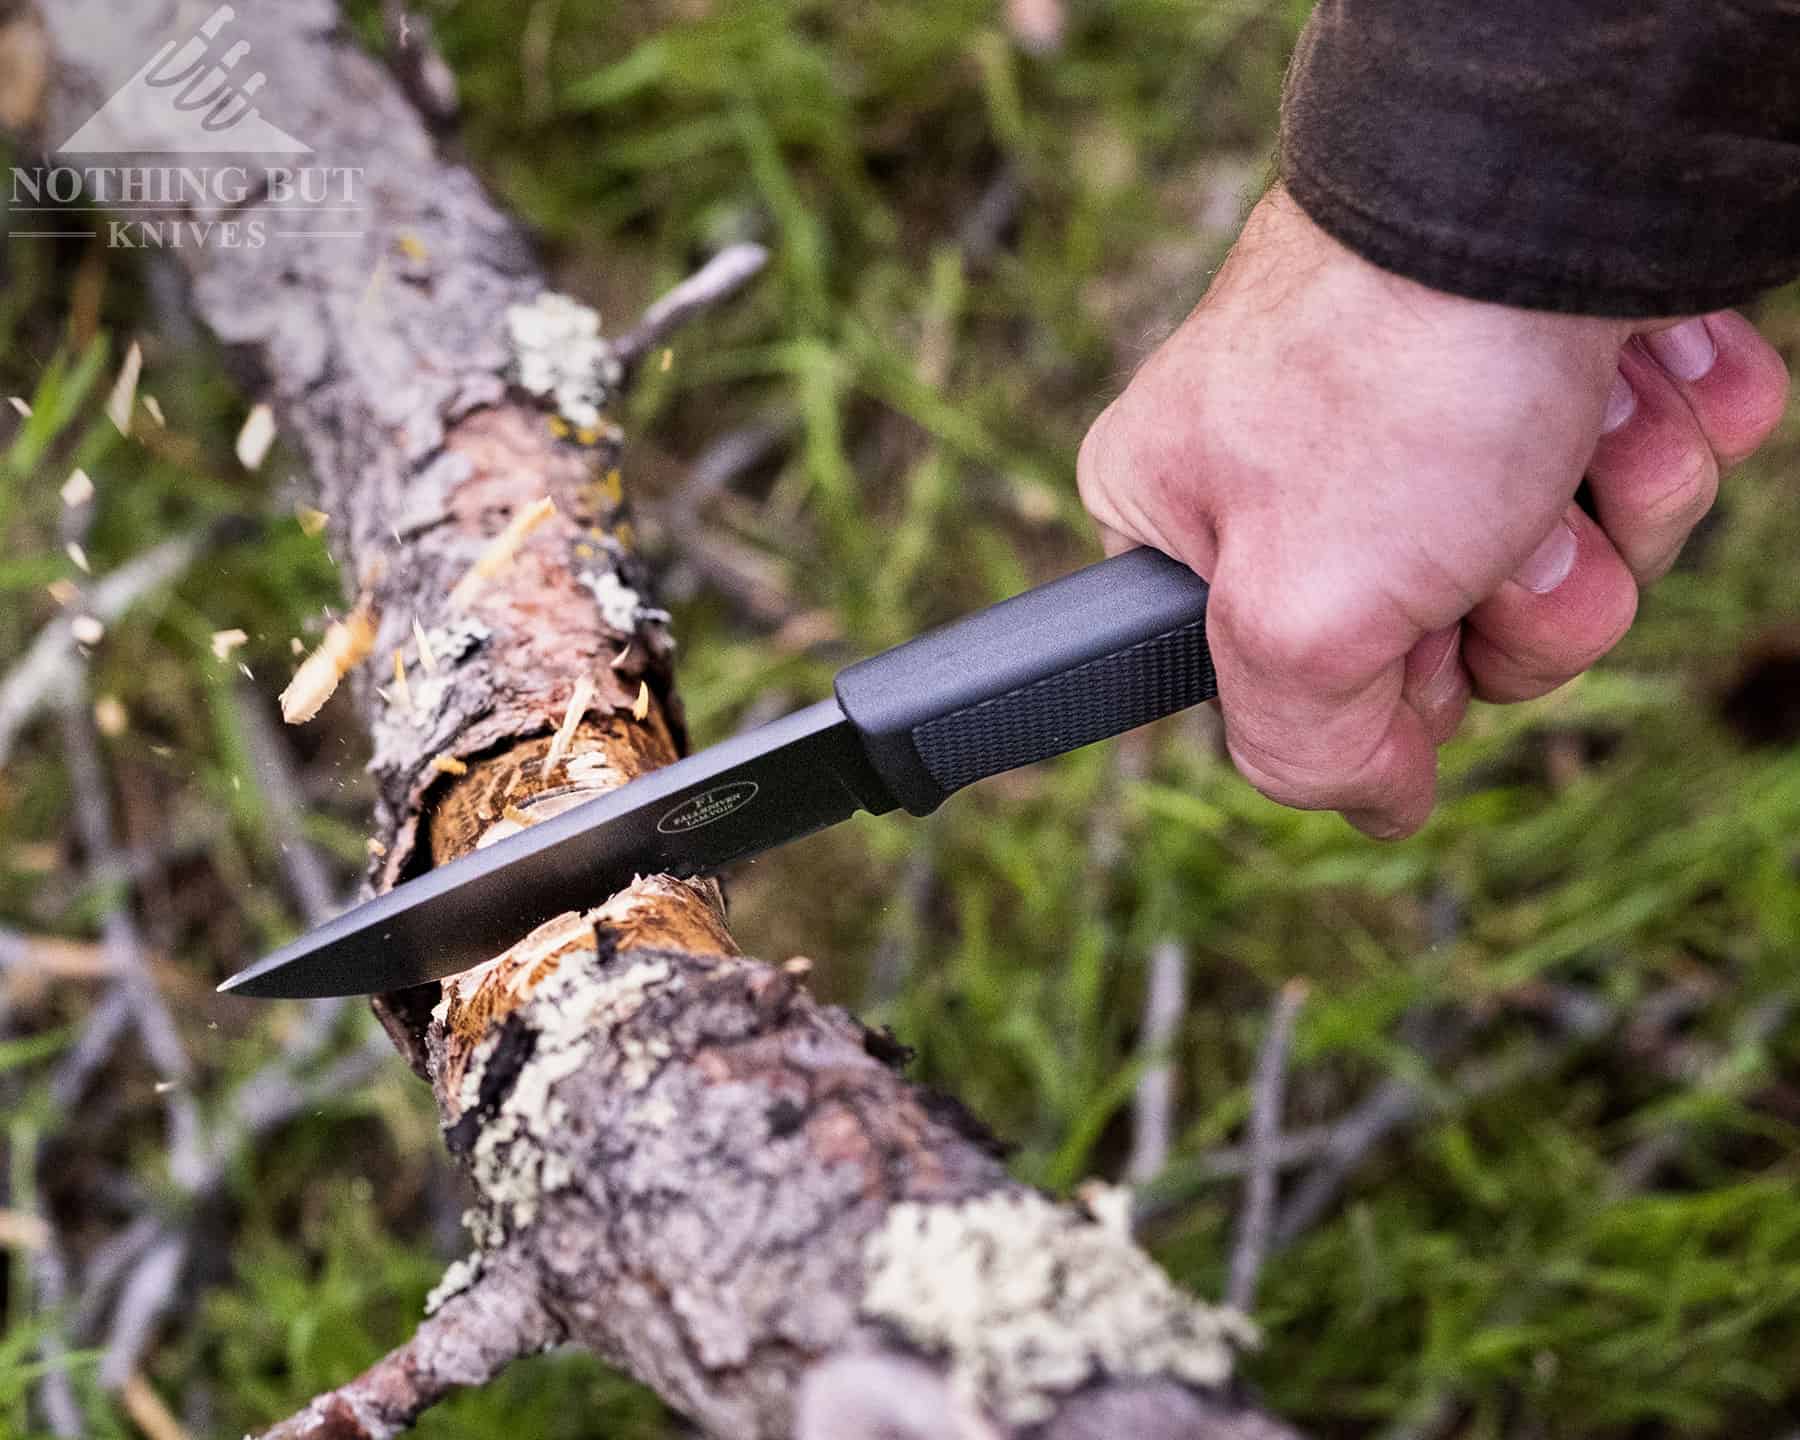 The Falkniven F1 handles chopping well for a mid-size fixed blade. 